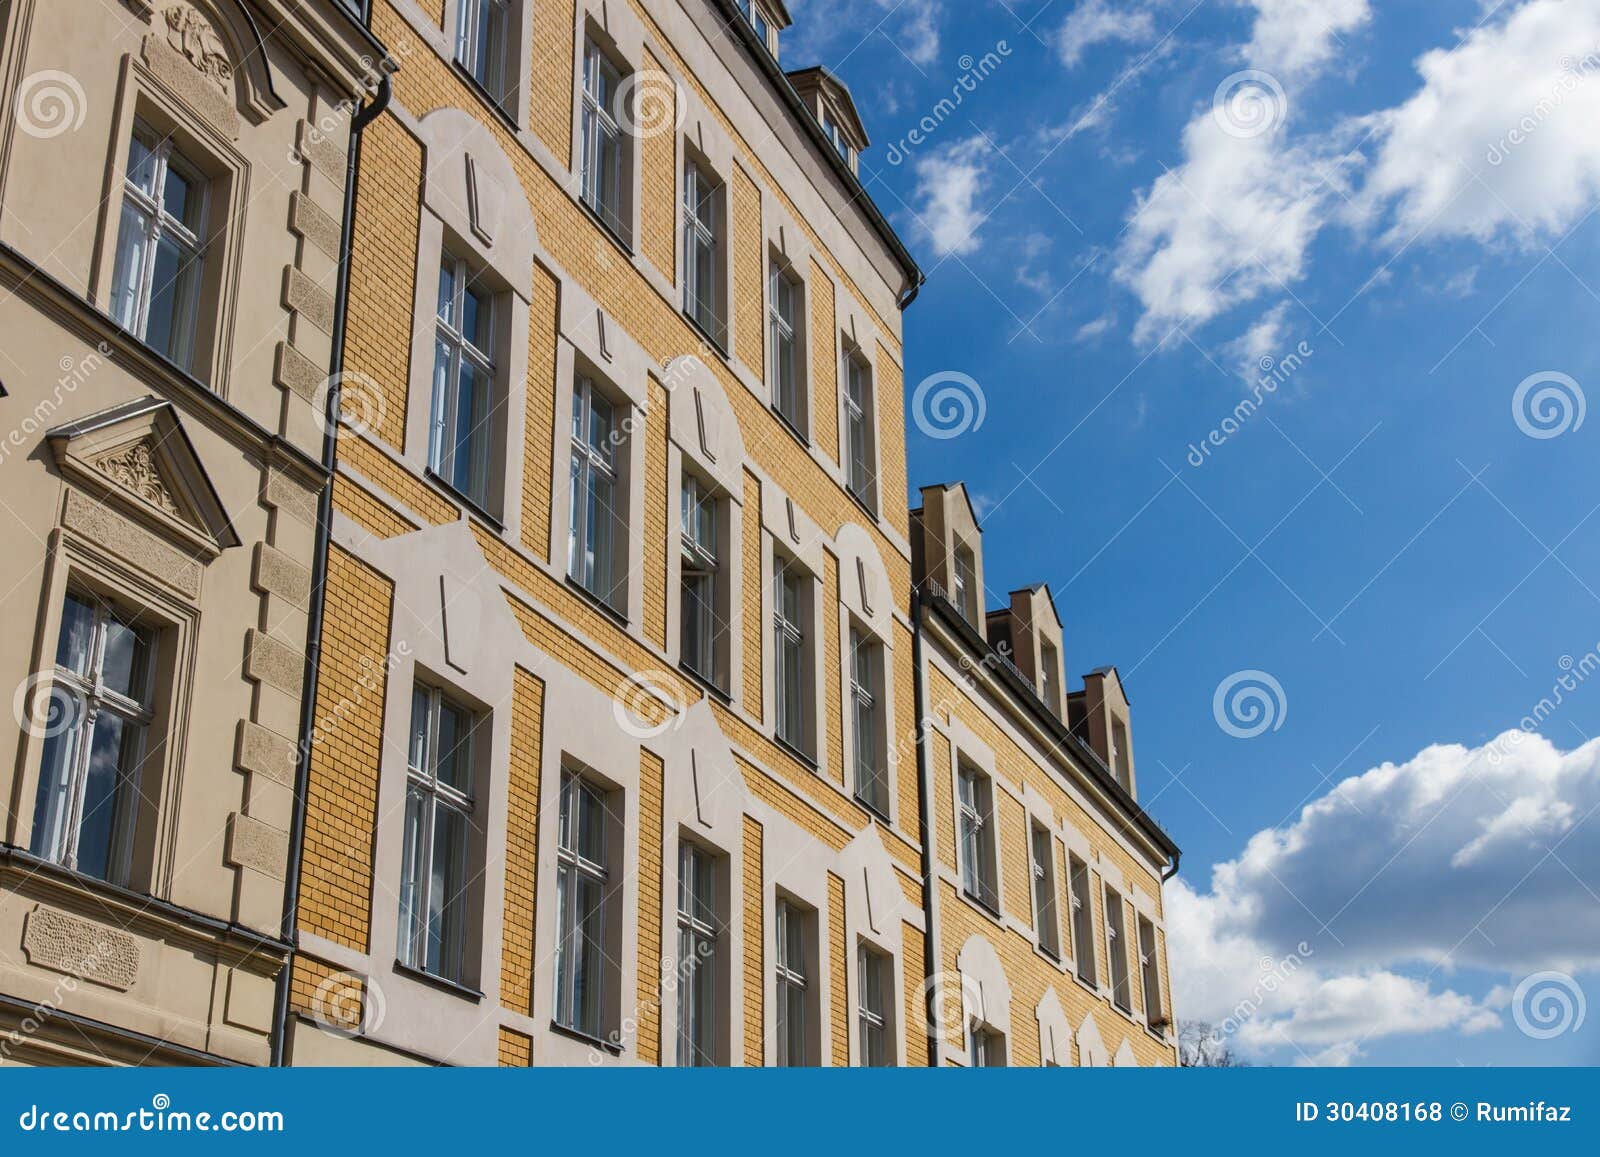 front of buildings in an old town in germany